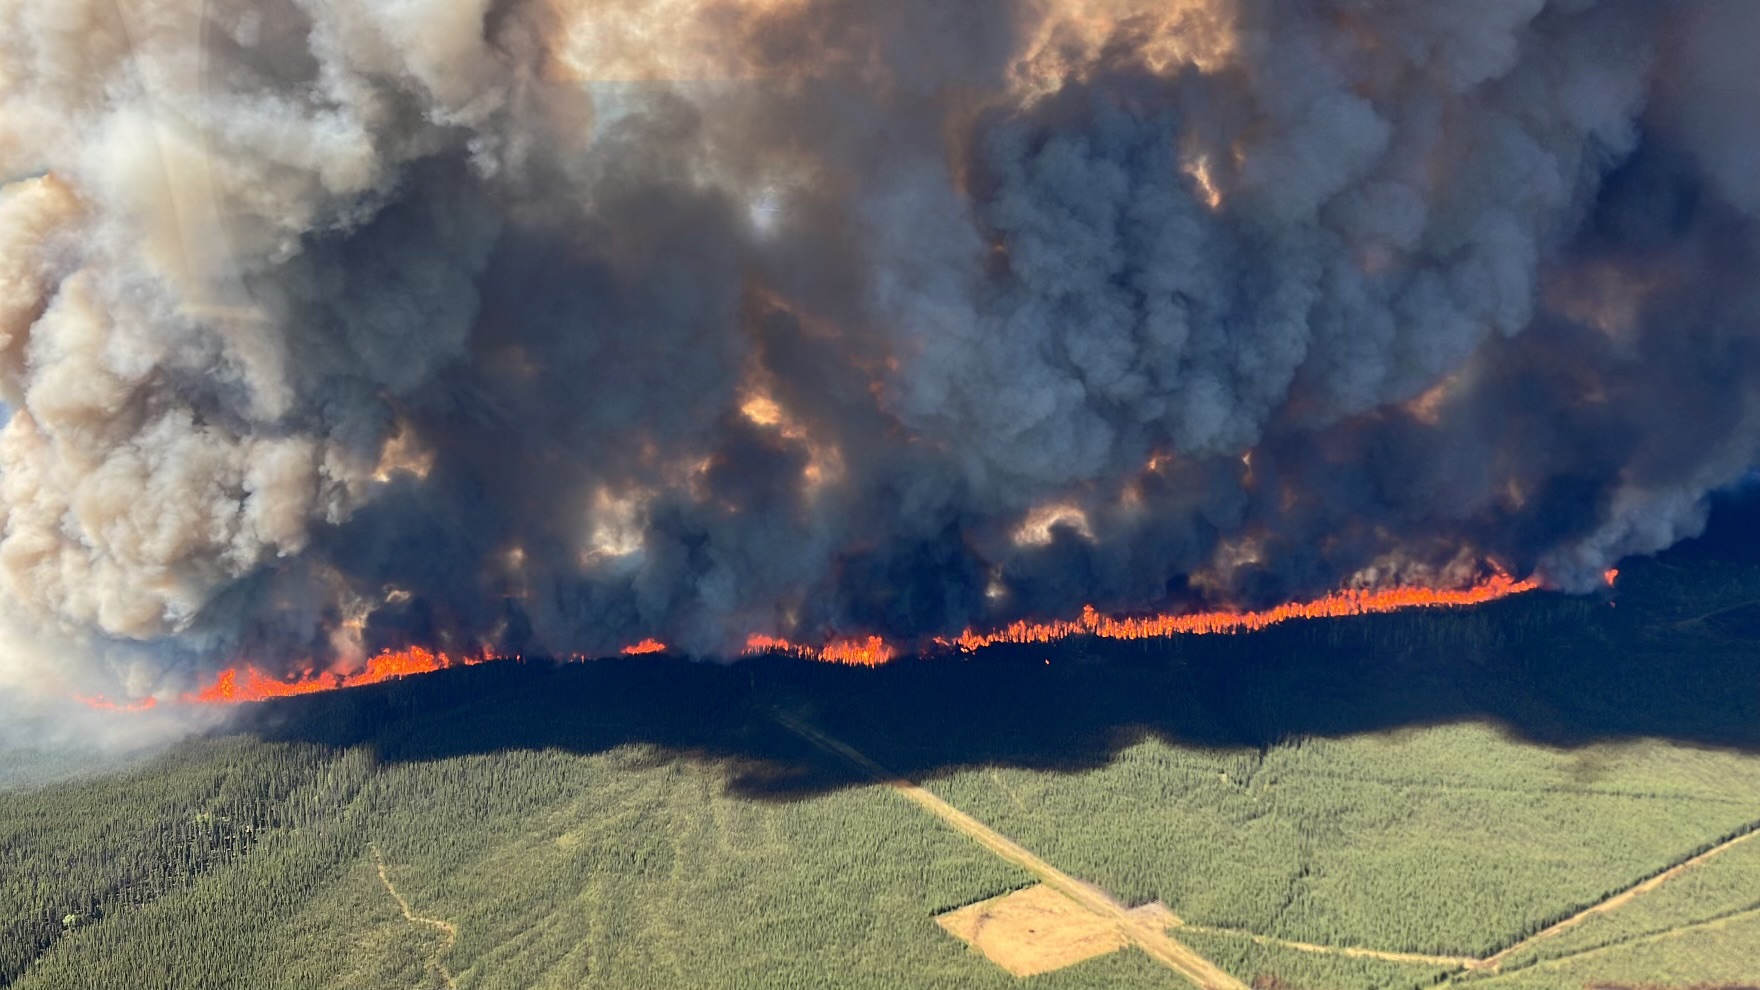 Aerial view of a wildfire. End of image description.